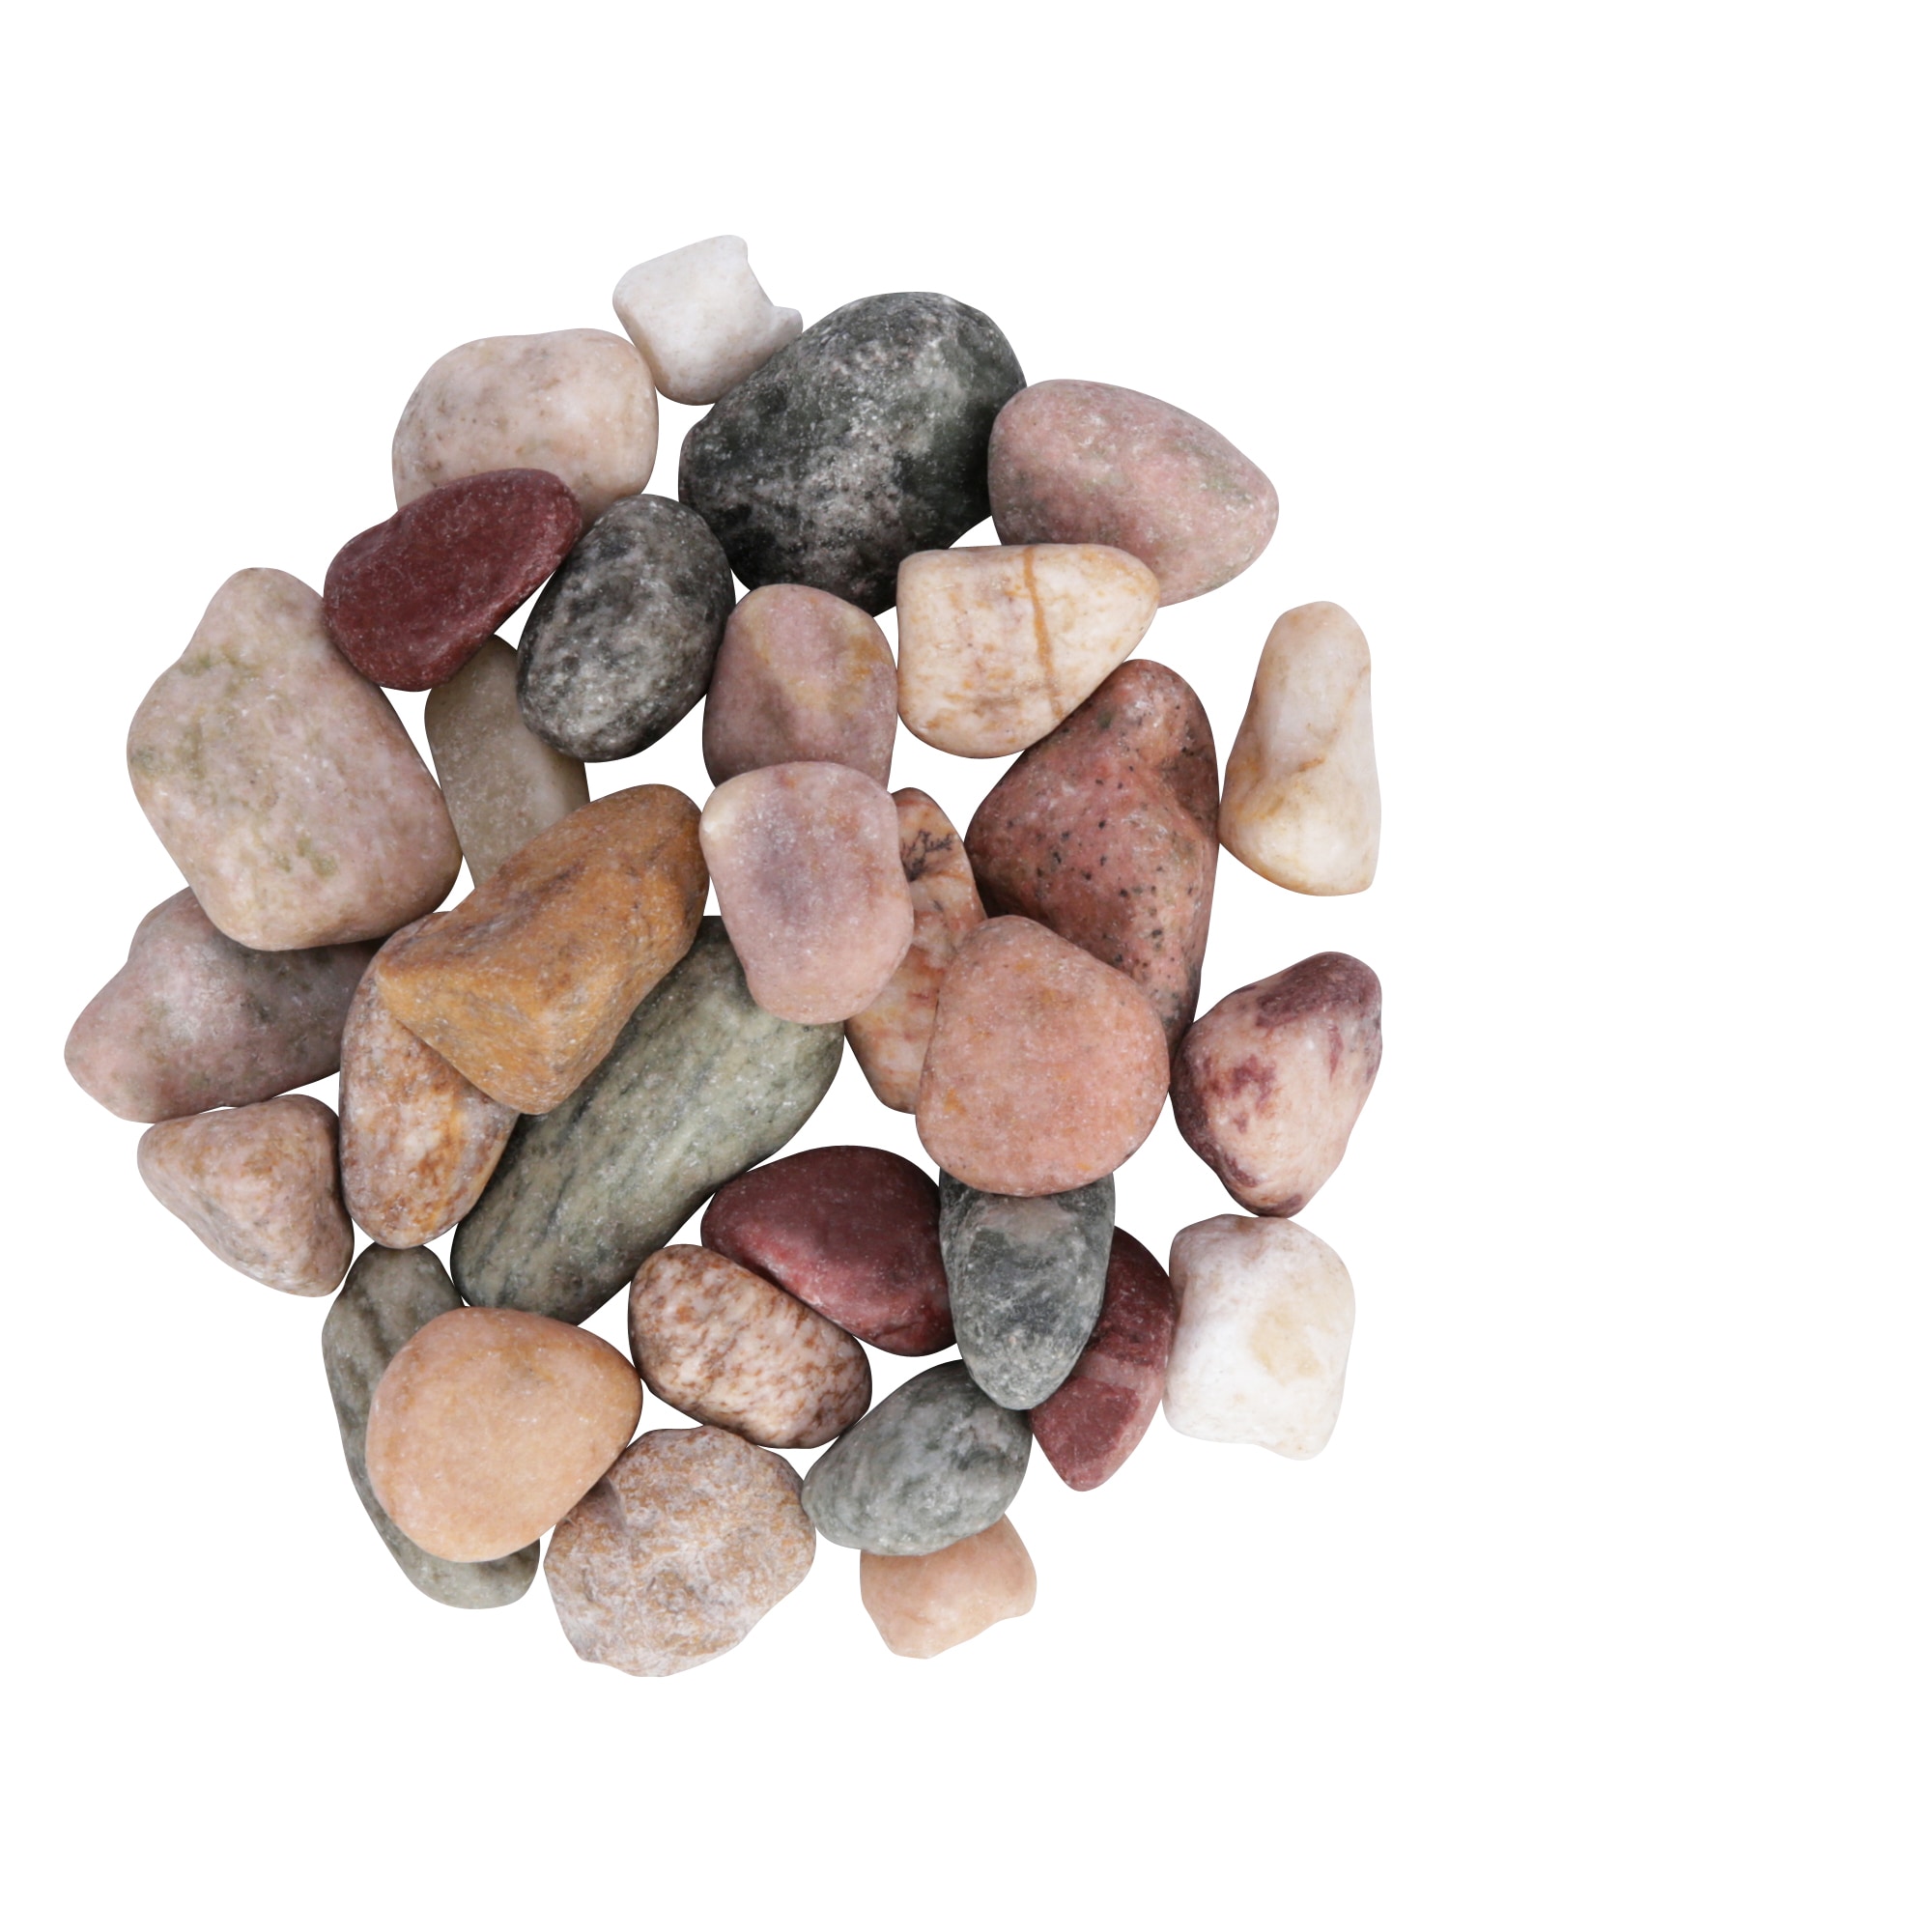 2 Pounds Pebbles Polished Gravel, Natural Polished Mixed Color Stones,  Small Decorative River Rock Stones (32-Oz)